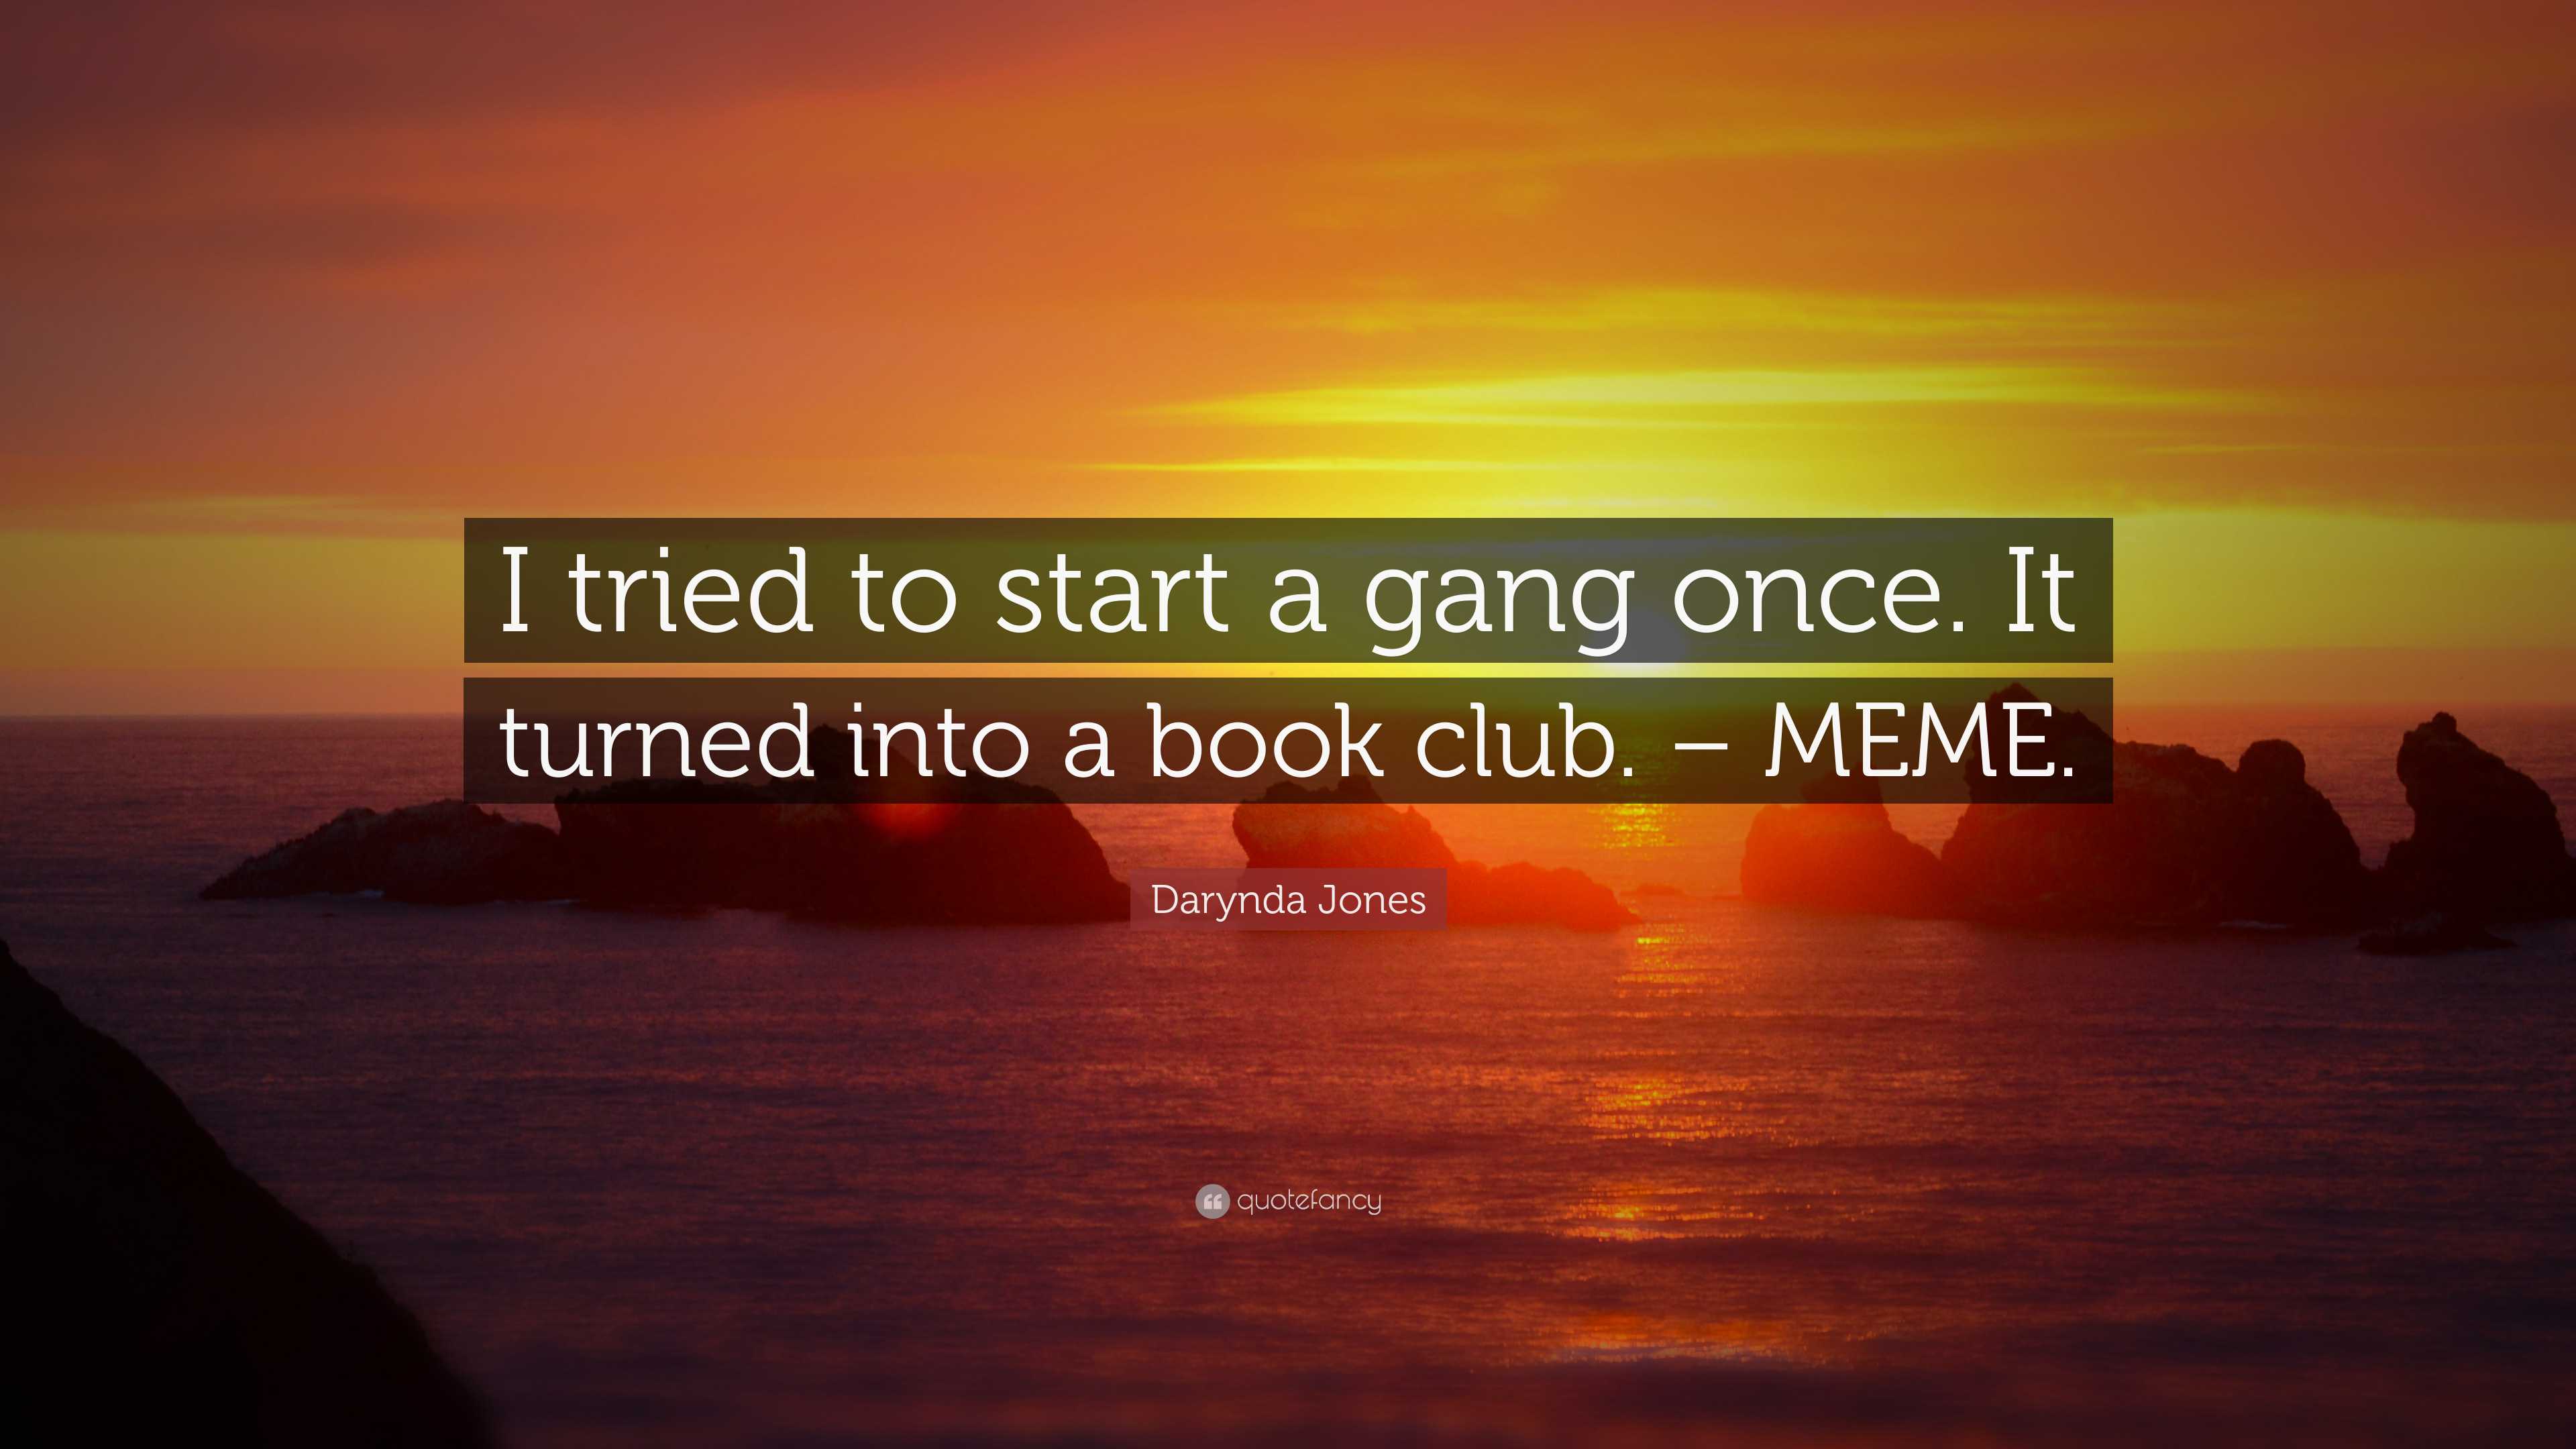 Darynda Jones Quote: “I tried to start a gang once. It turned into a ...